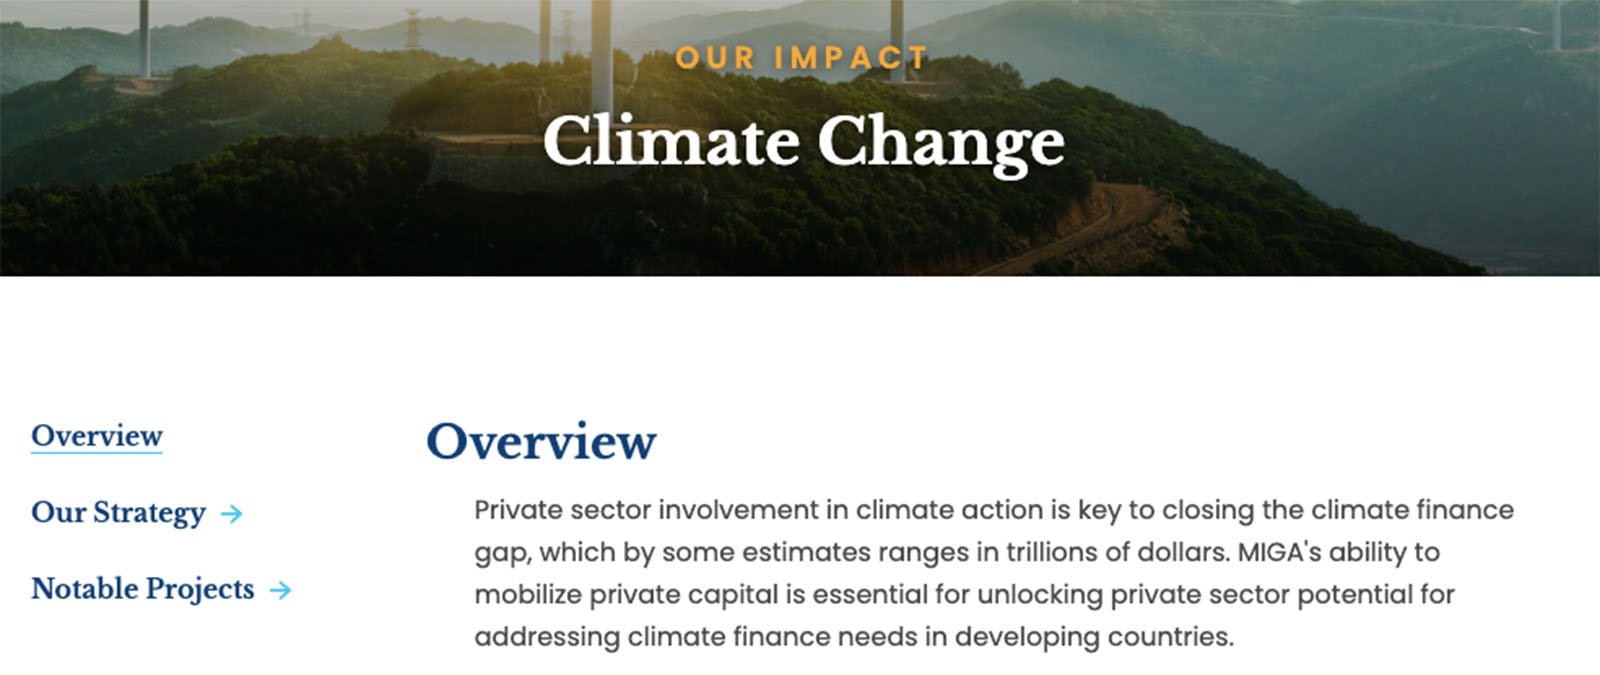 Web page header with words “Climate Change” and an intro text